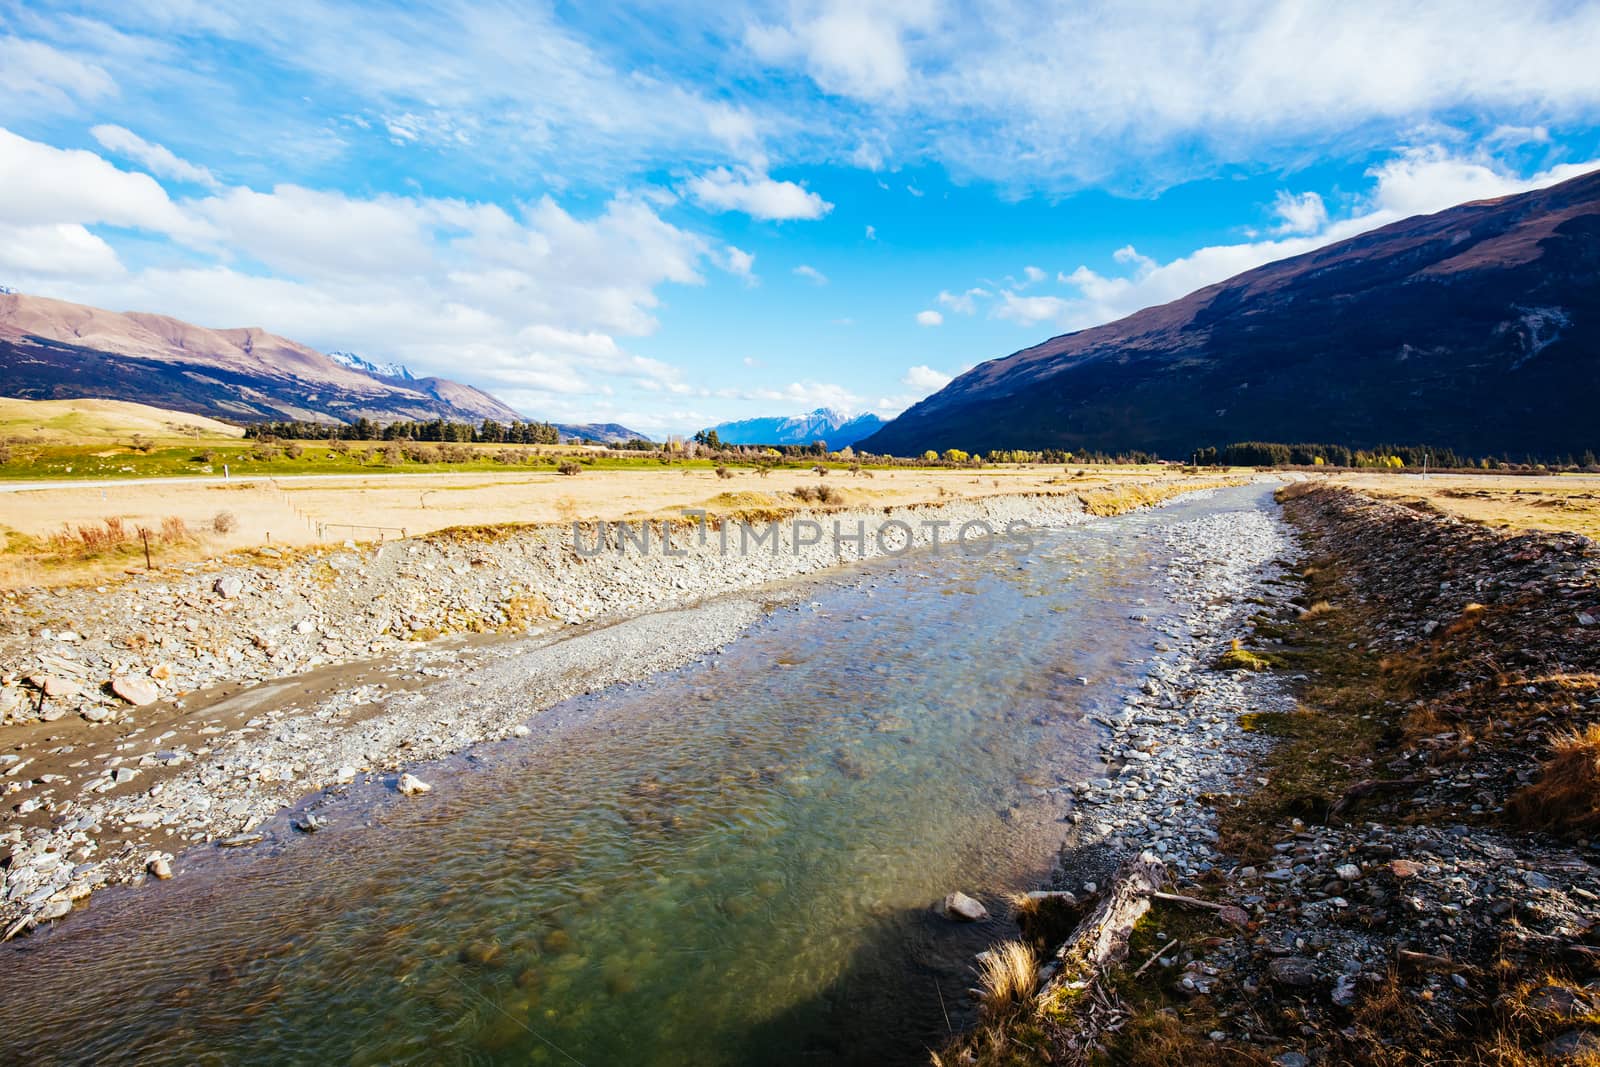 Stunning mountain landscape in an area known as 'Middle Earth' between Paradise and Glenorchy in New Zealand